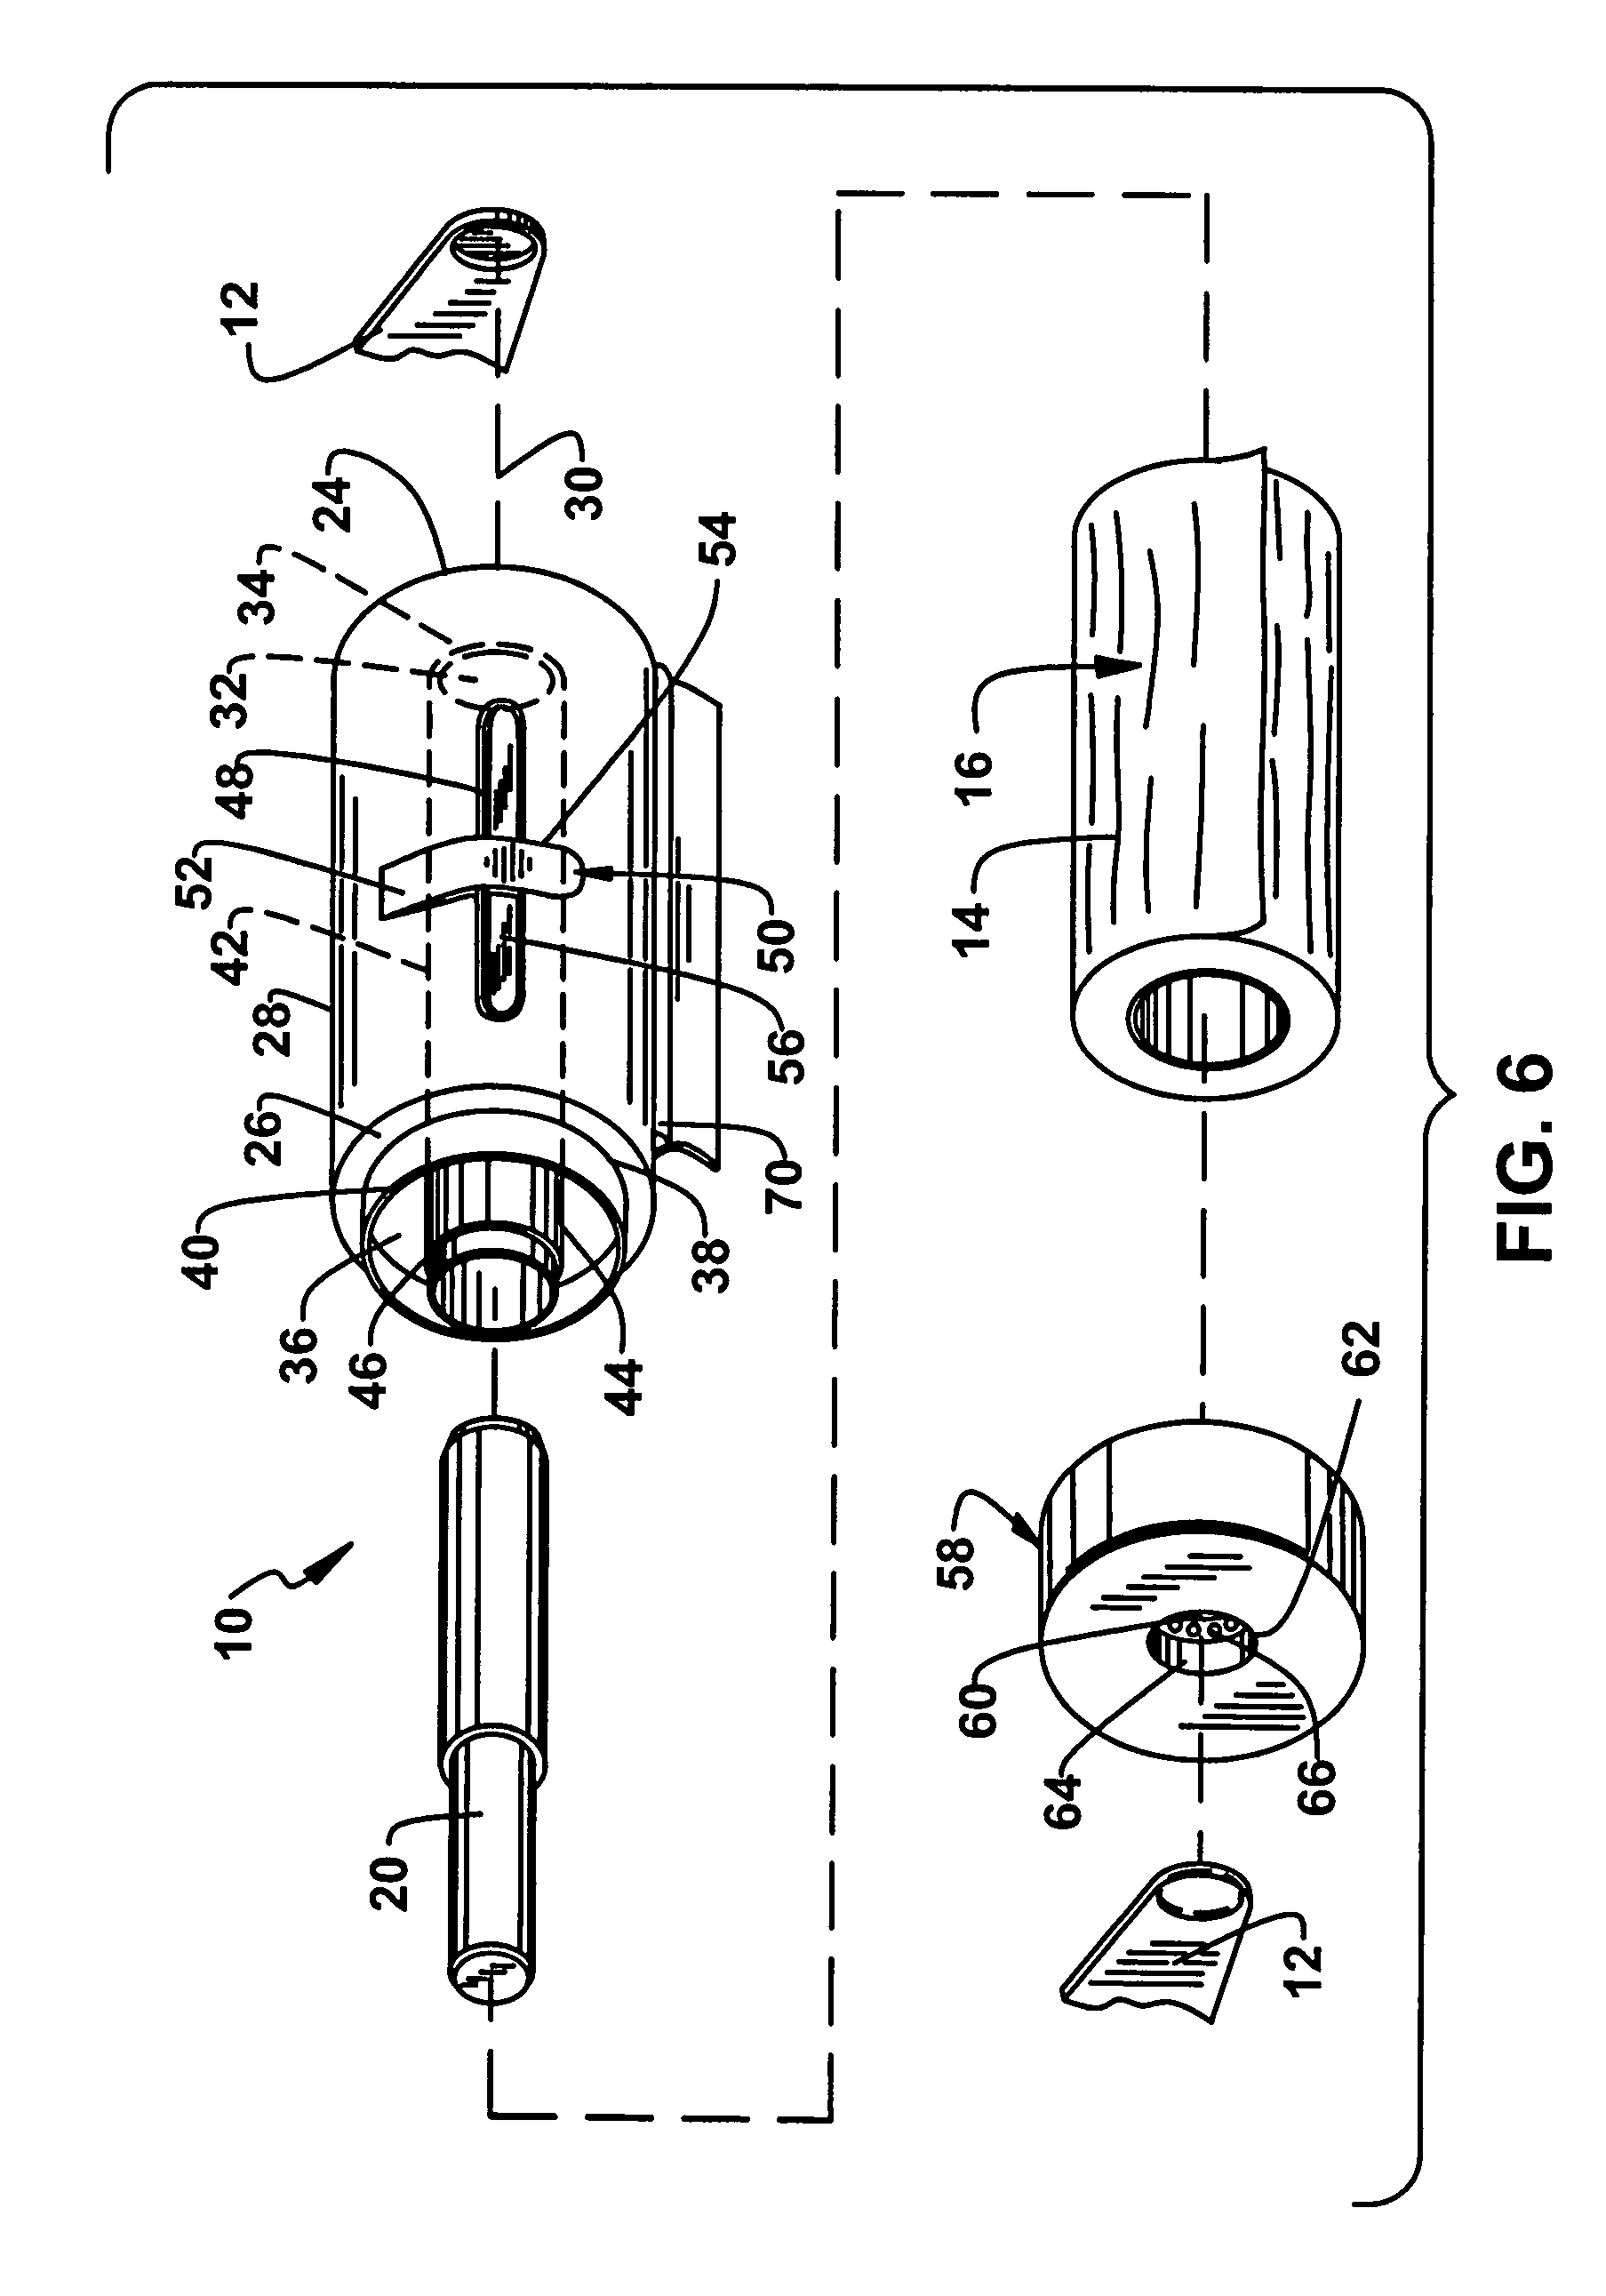 Dispenser for readily attaching to a role-type toilet-tissue holder and dispensing moist towelettes from a role